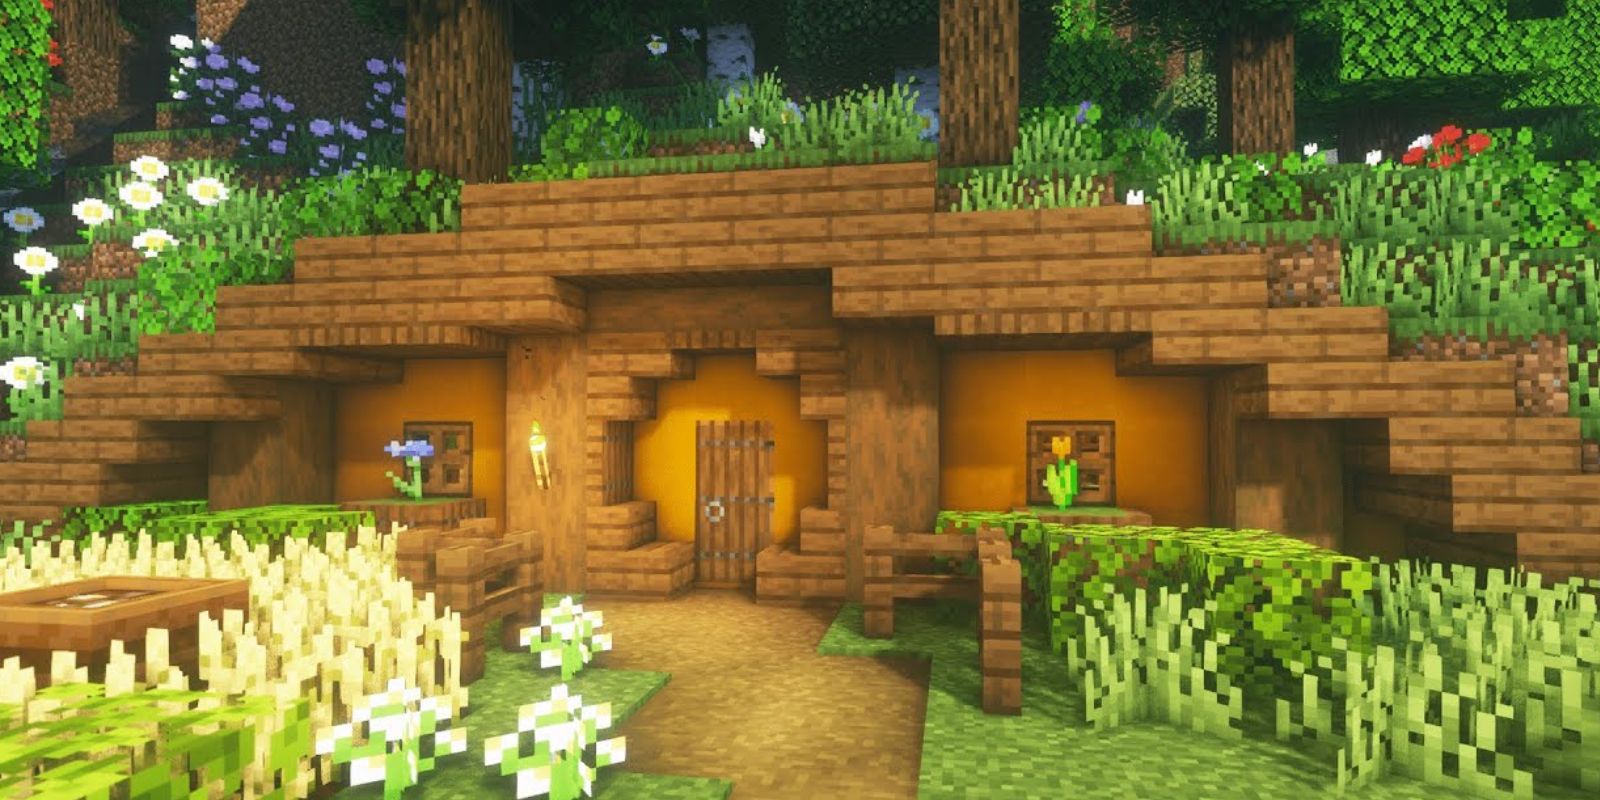 Minecraft's Lord of the Rings & Middle-Earth Designs